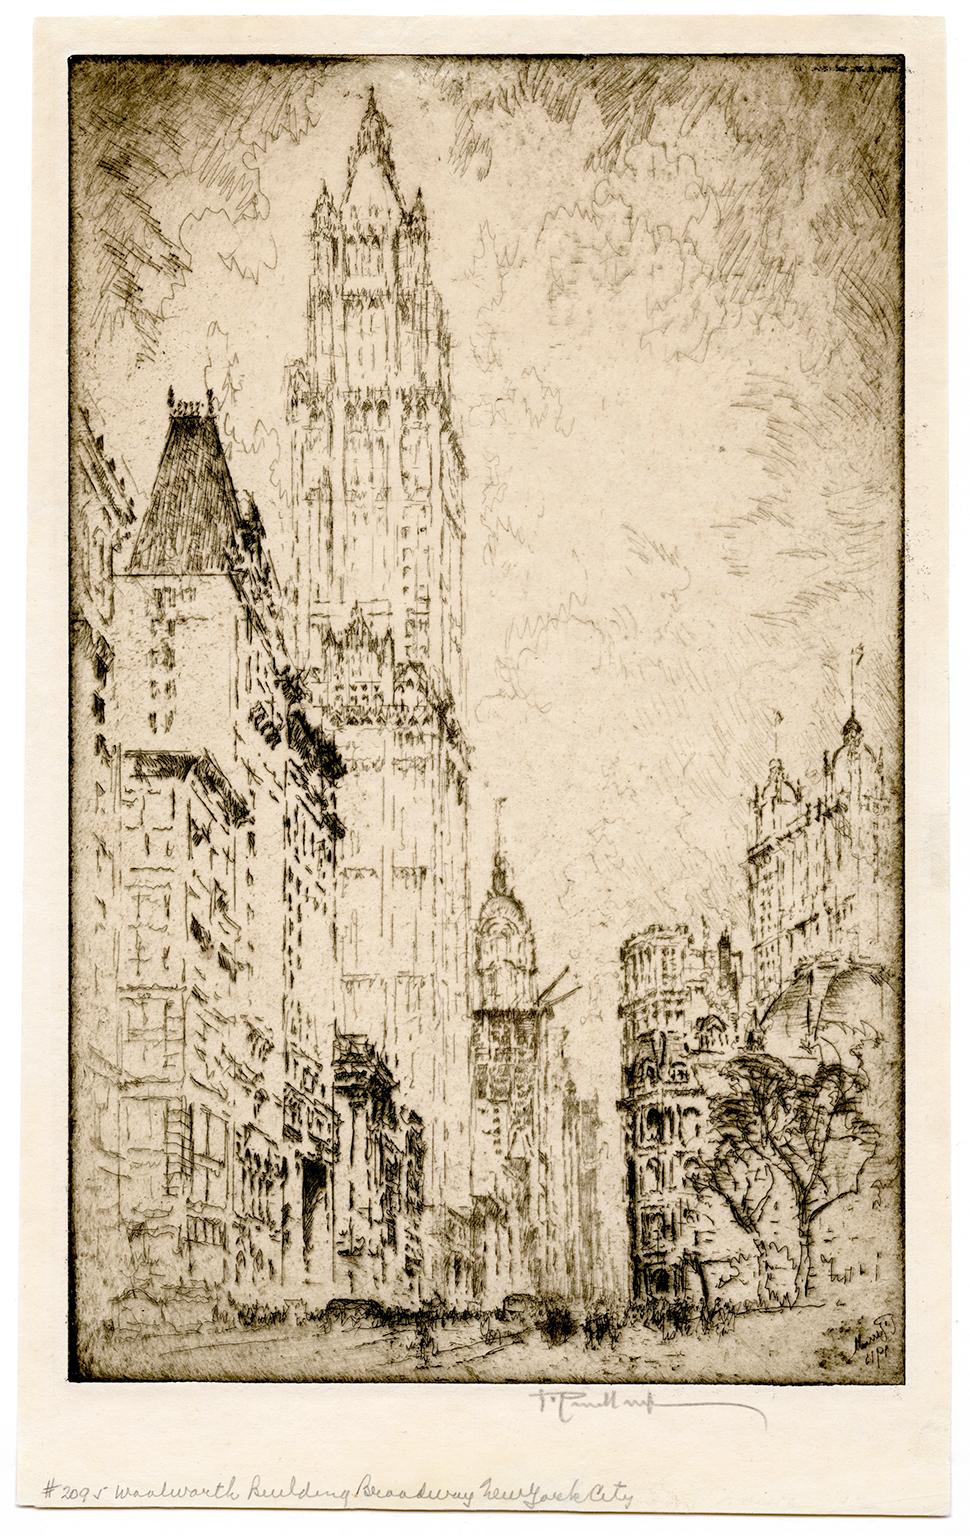 The Woolworth Building — early 20th-Century New York City - Print by Joseph Pennell